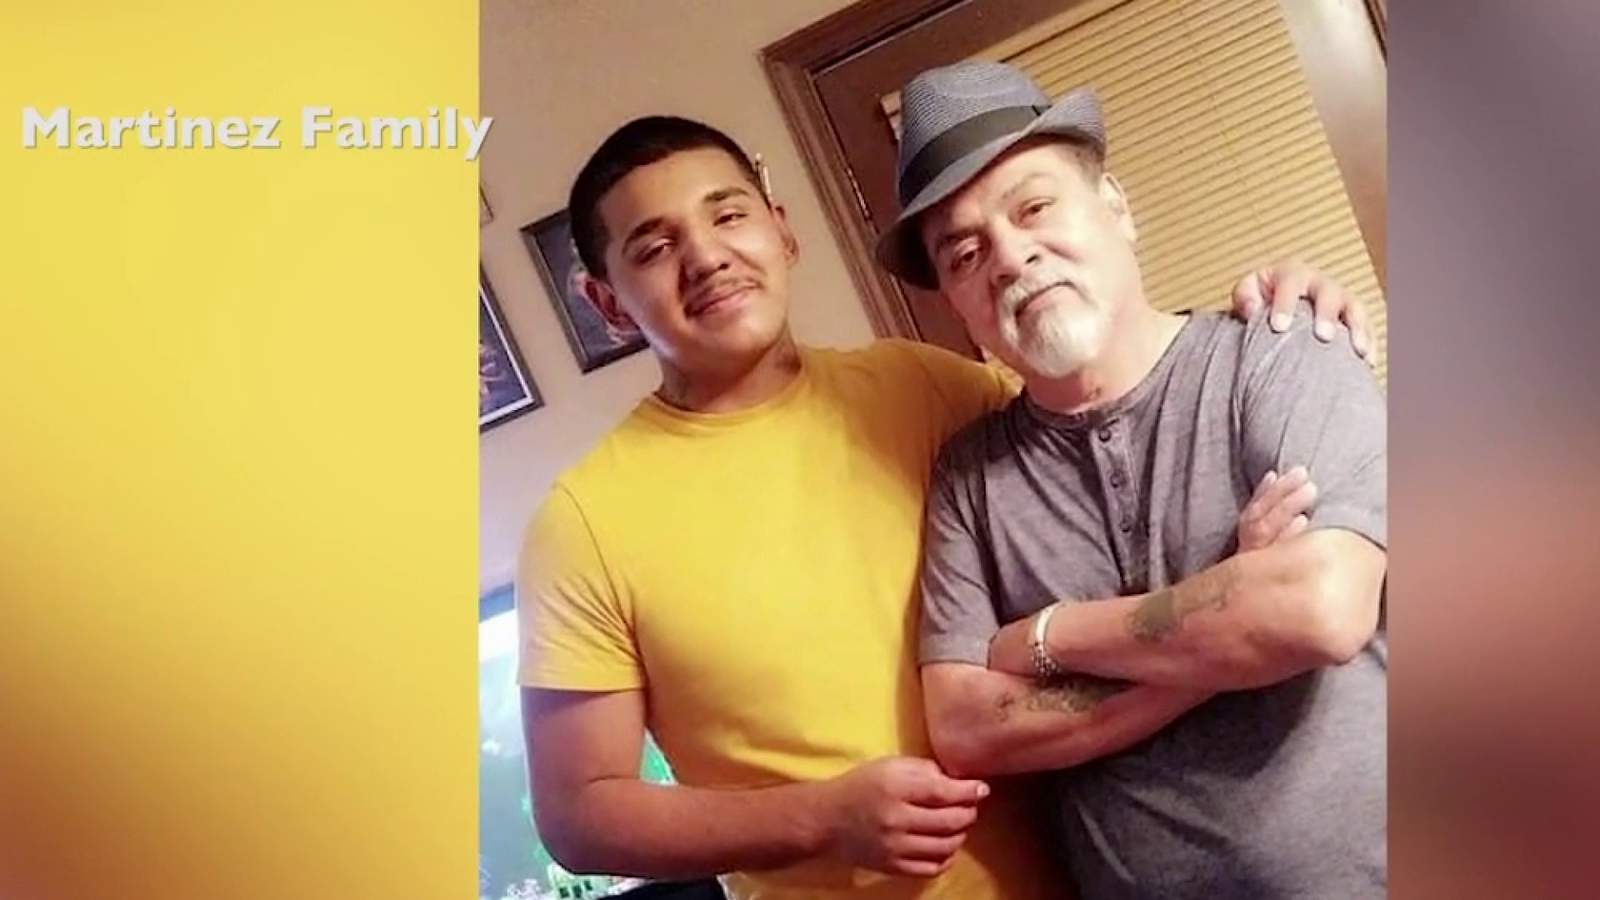 ‘We’re so heartbroken': Family of teen killed by vehicle said he died trying to save friend